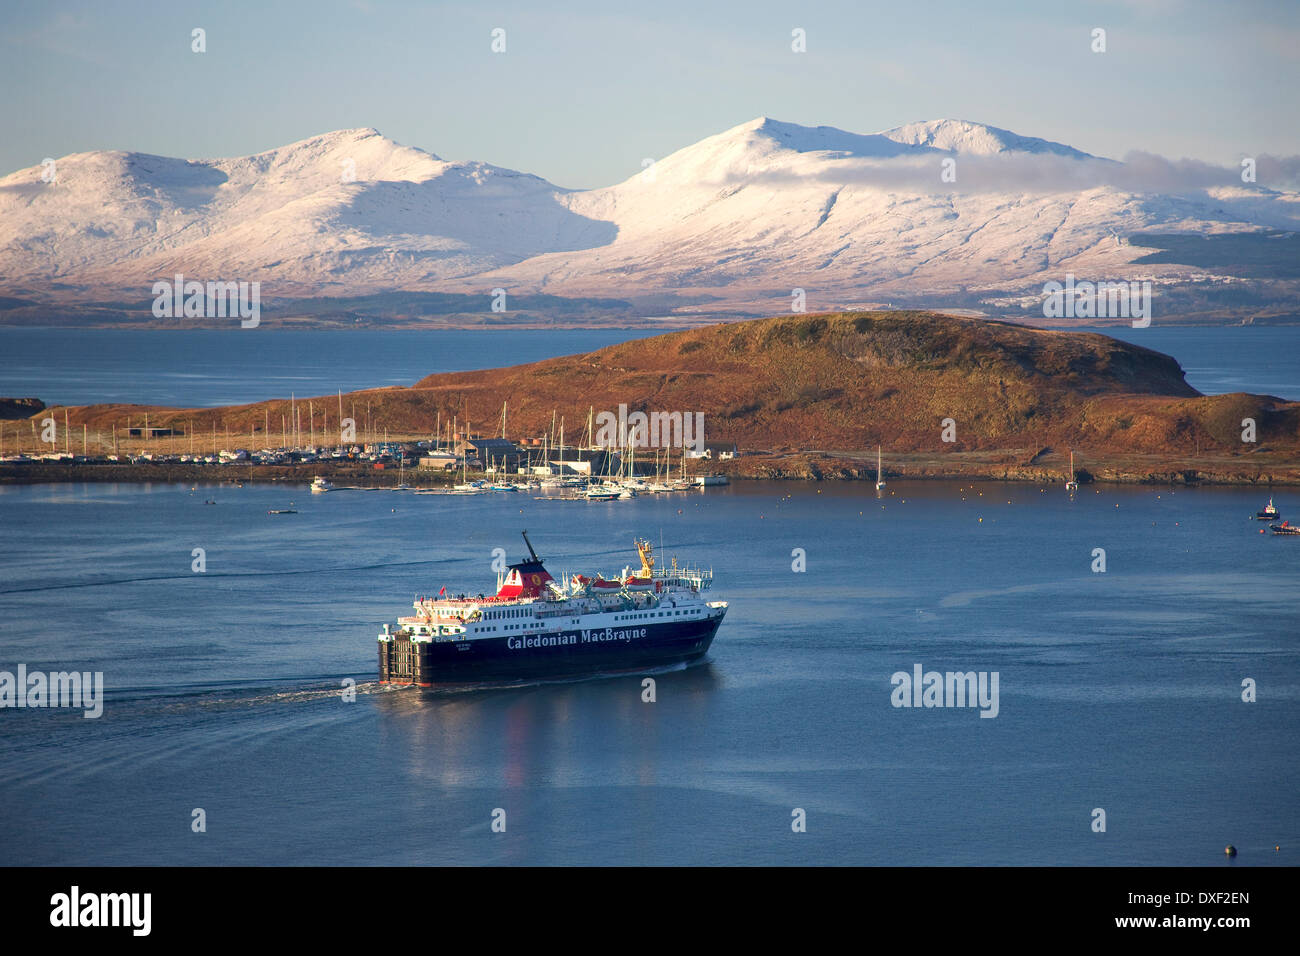 M.V.Isle of Mull departs Oban with Ben More on Mull in view, Argyll Stock Photo